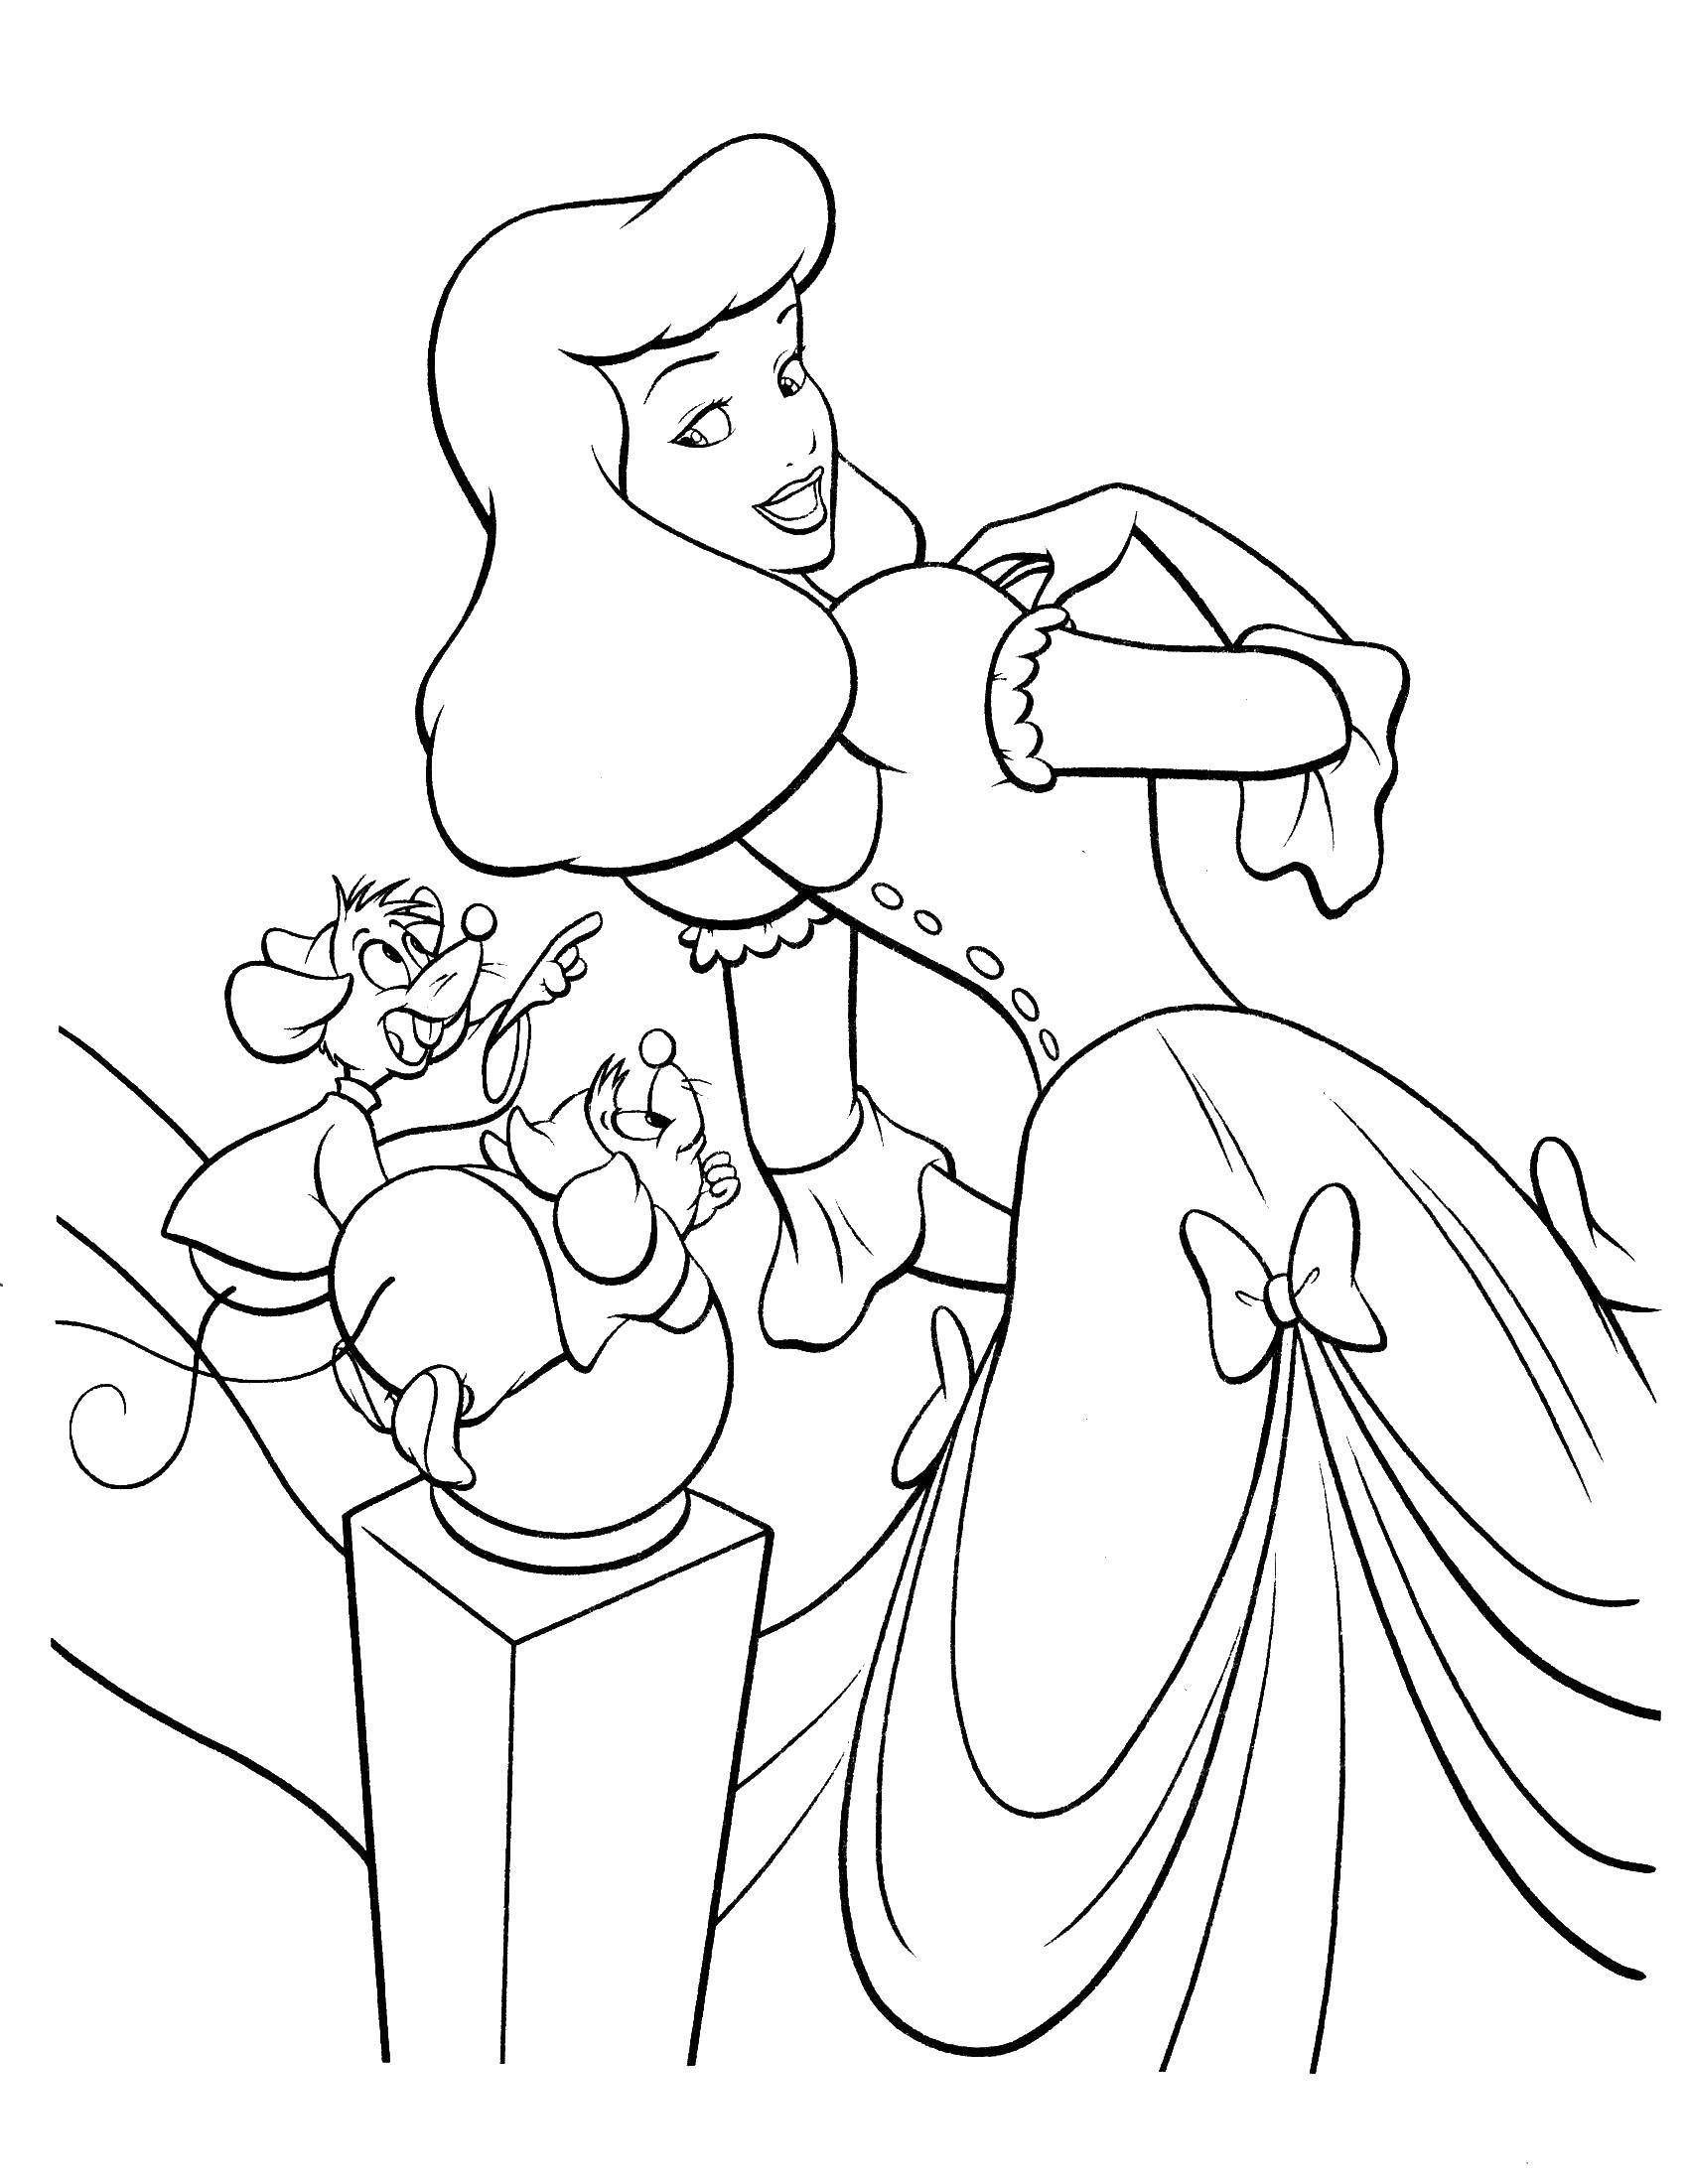 Coloring Cinderella tries on a dress. Category Cinderella and the Prince. Tags:  Cinderella.